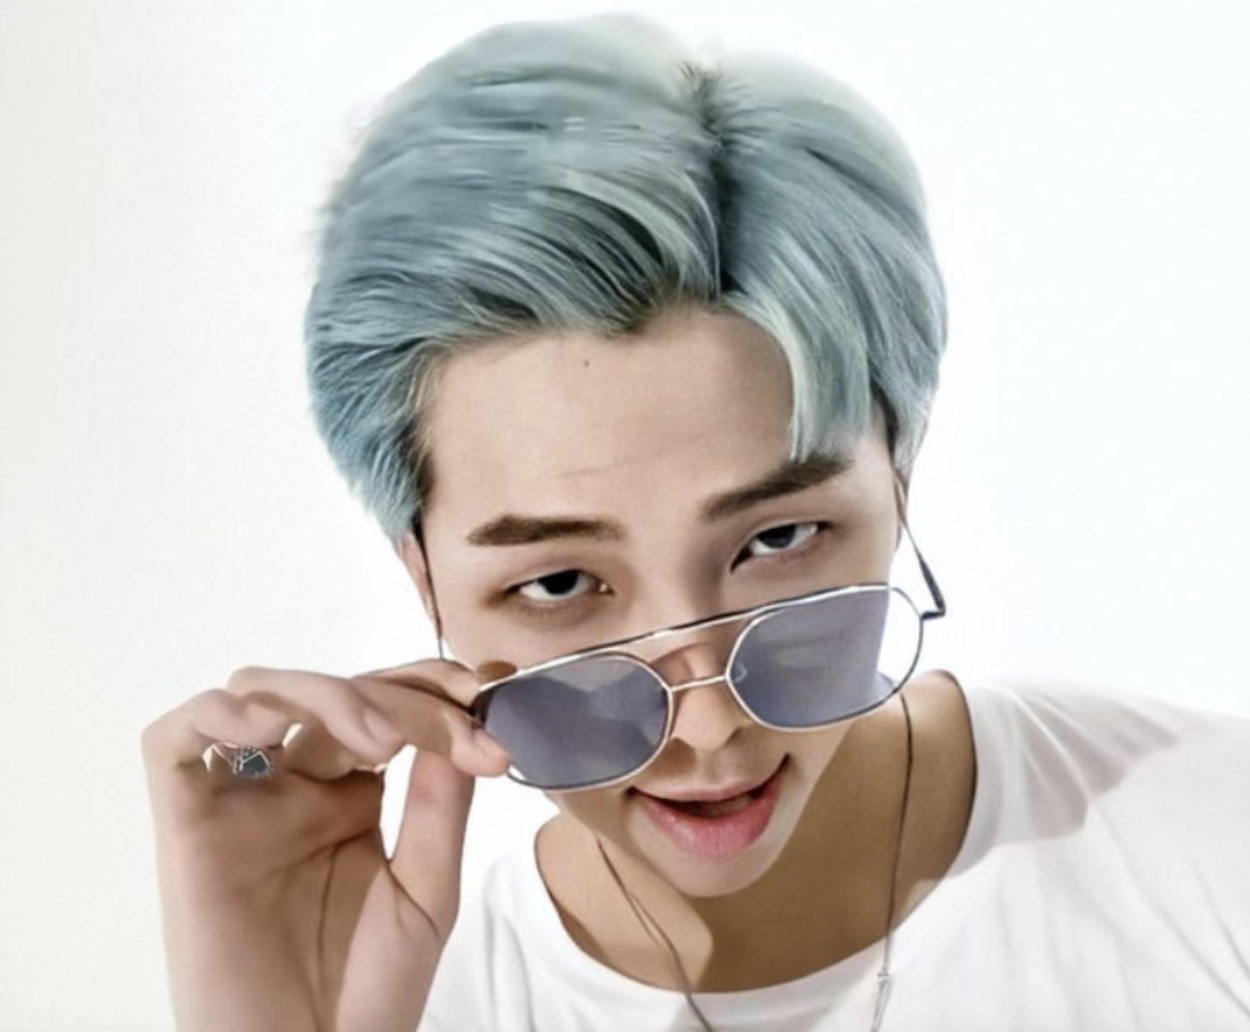 BTS RM with blue hair - wide 10